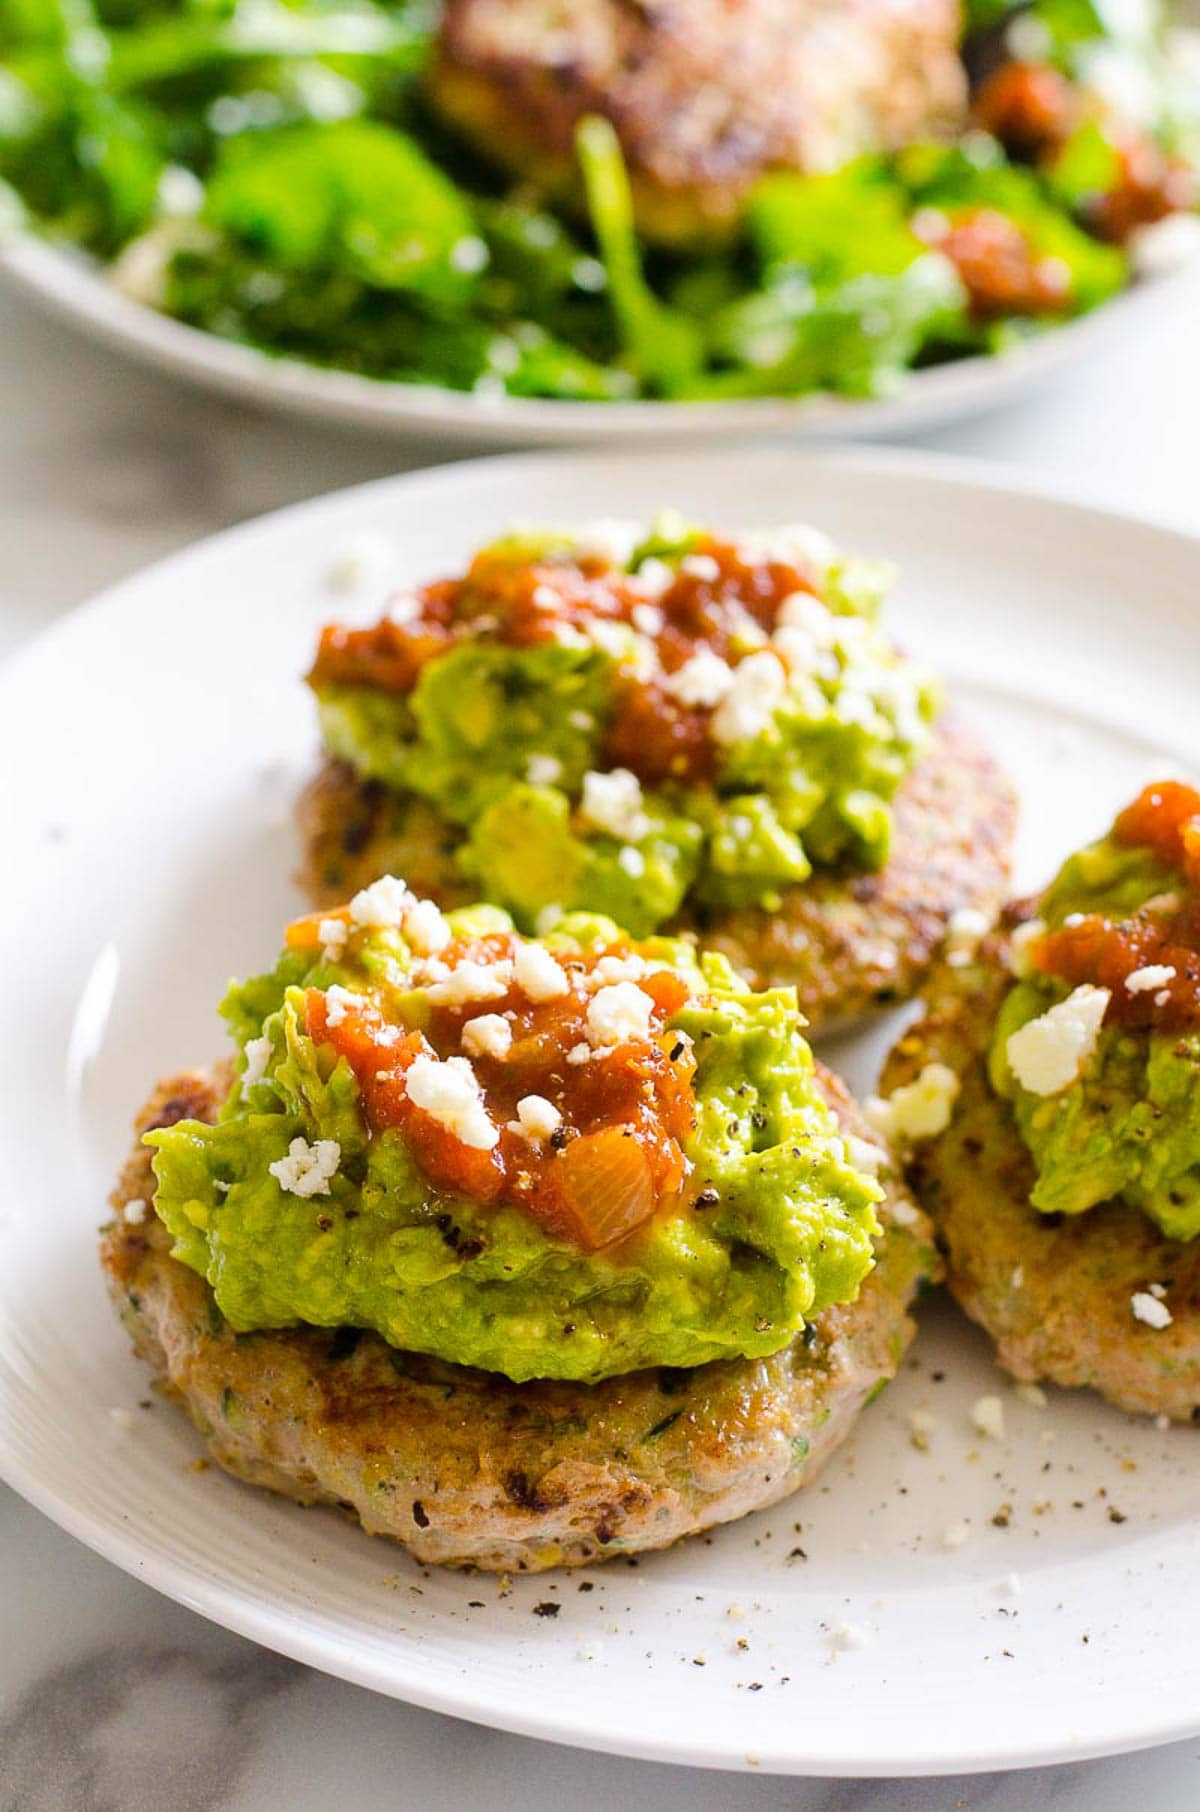 Healthy turkey burgers topped with guacamole, salsa and feta.